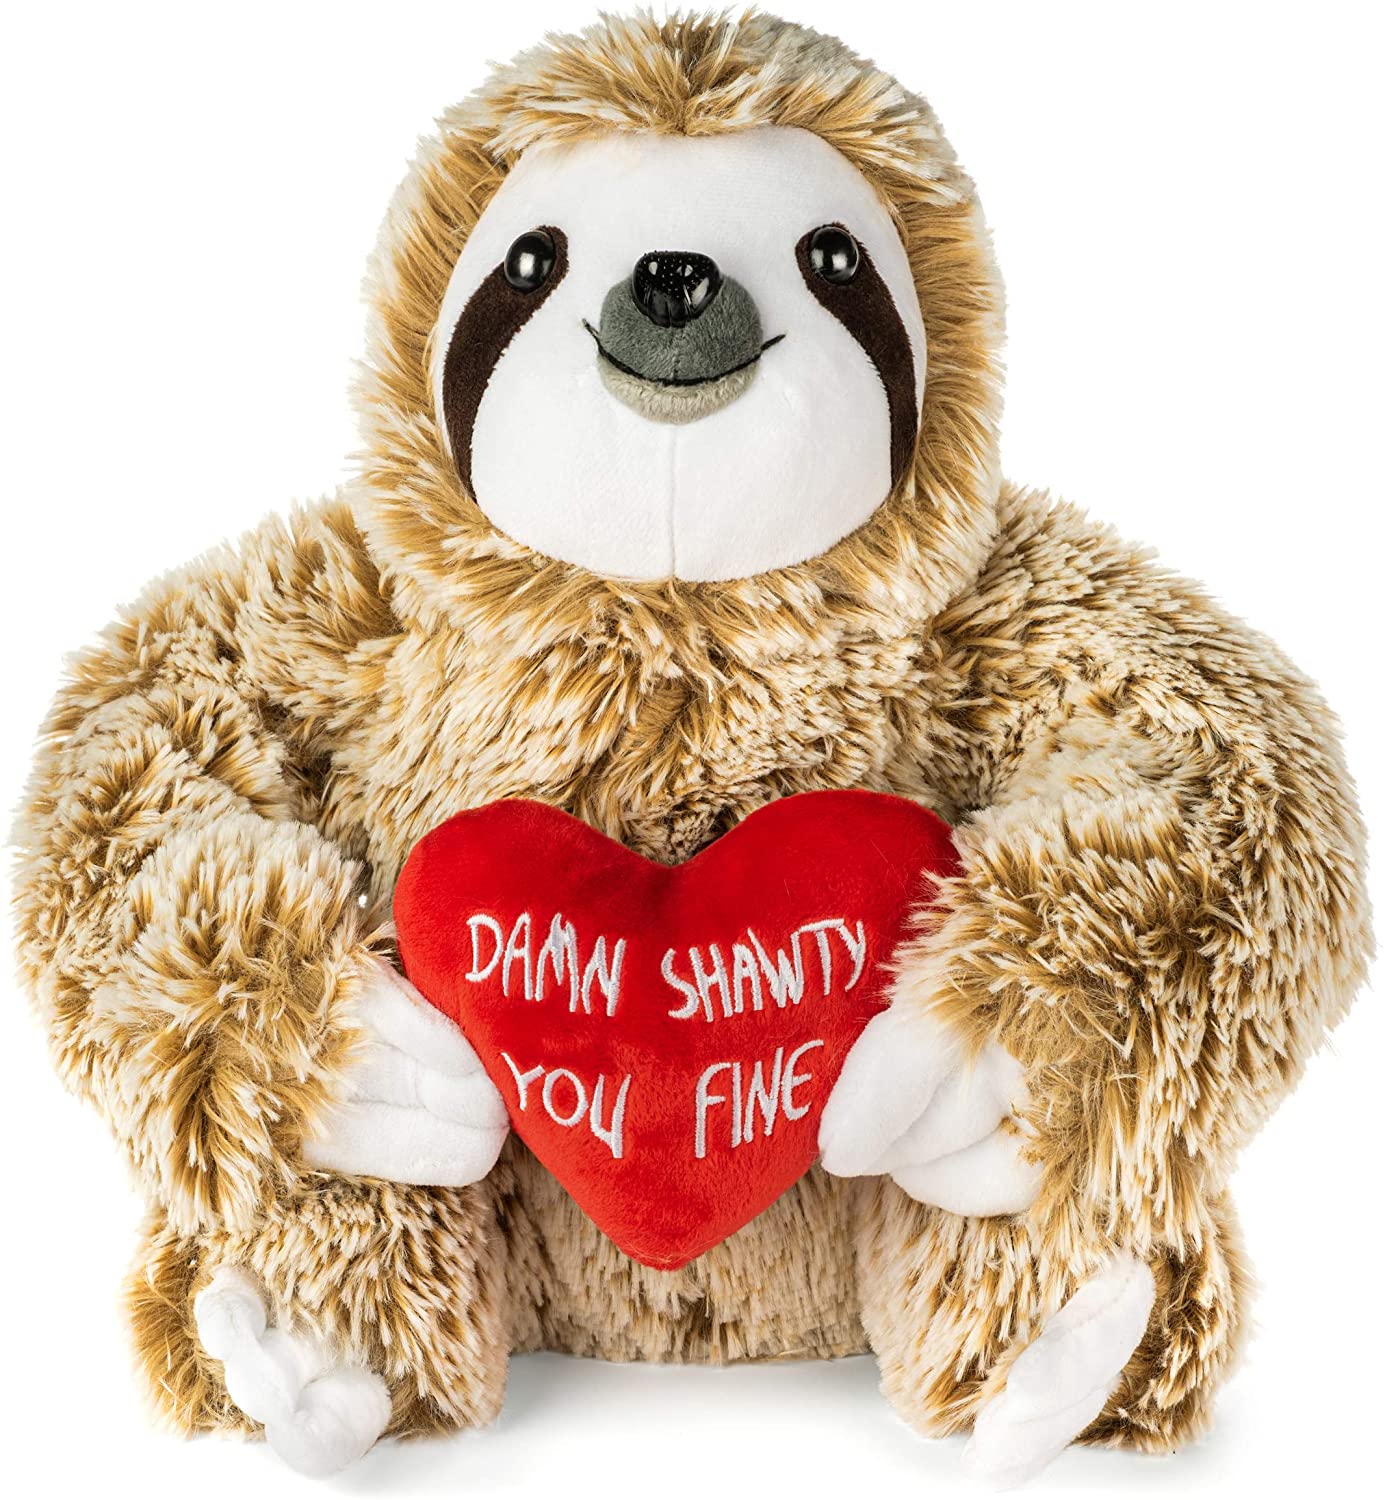 Valentines Day Sloth Stuffed Animal You Fine for Her, Plush Stuffed Toy Funny Valentines Day Gifts for Girlfriend, Toys & Games